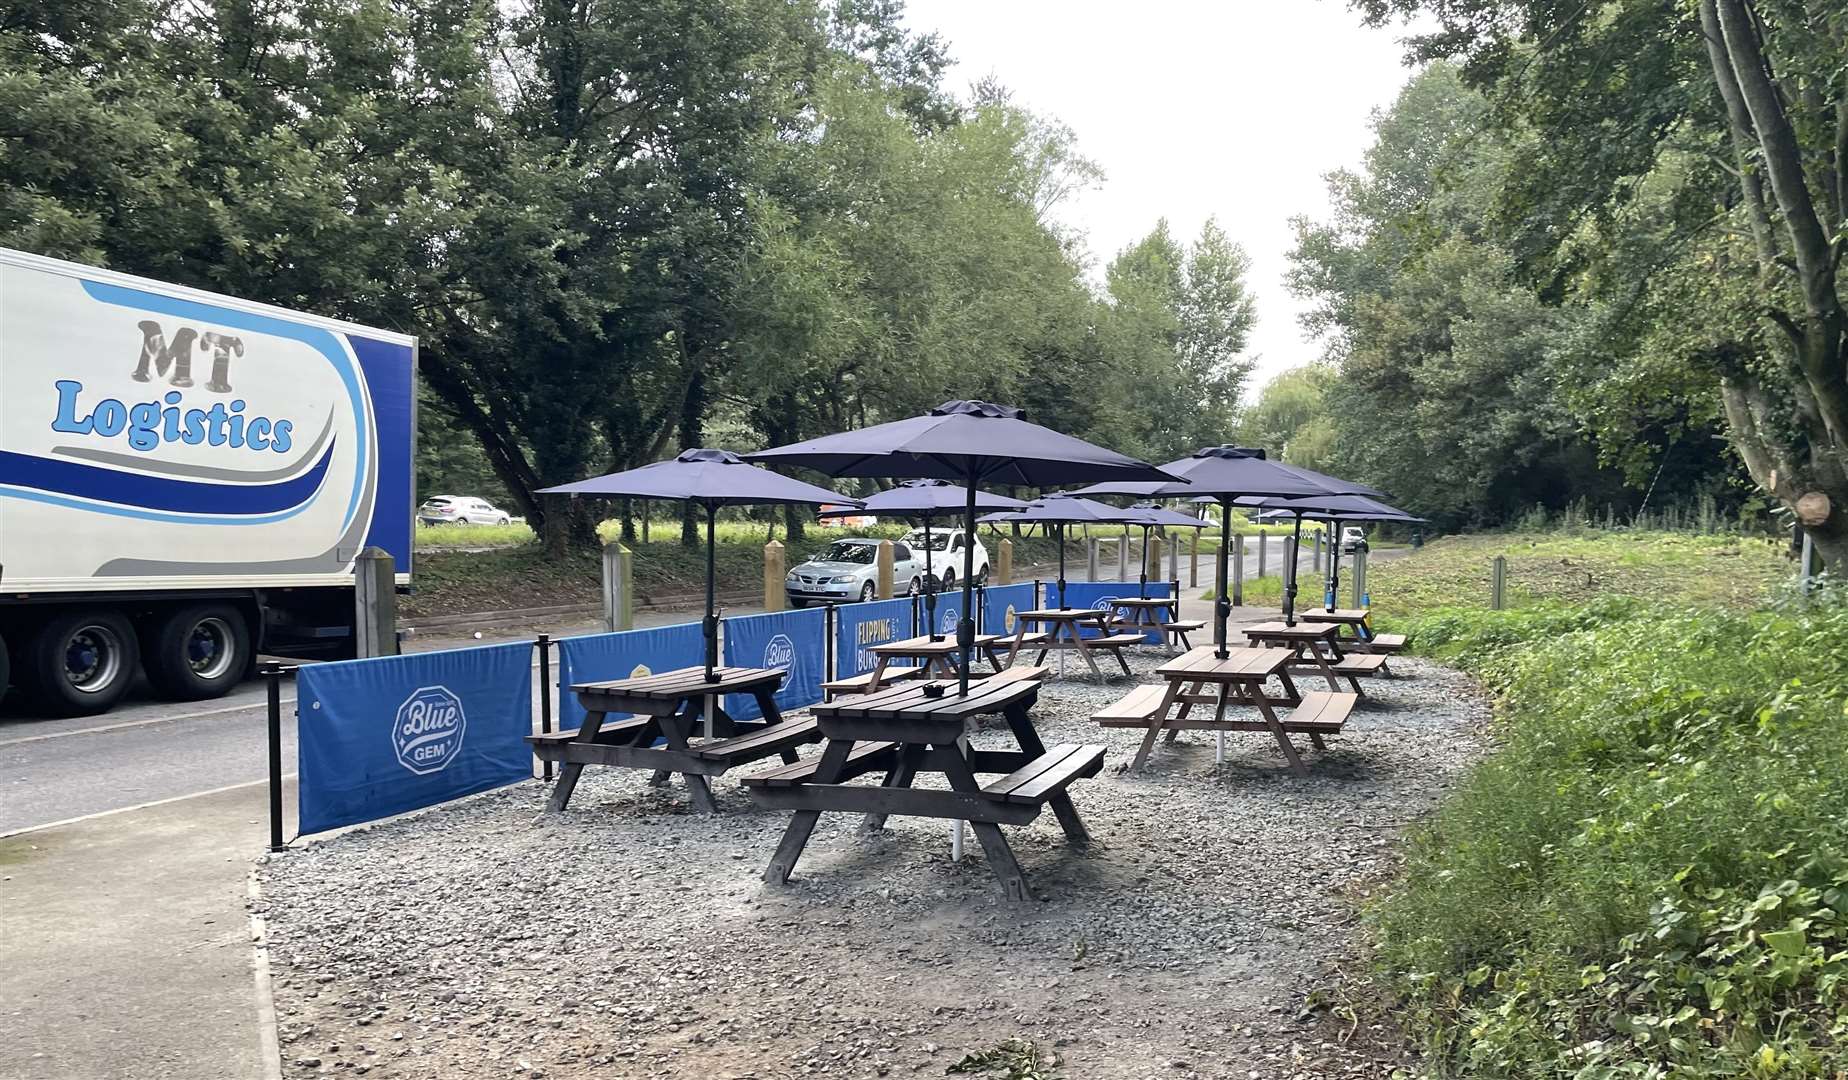 The seating area at the Blue Gem in Snodland